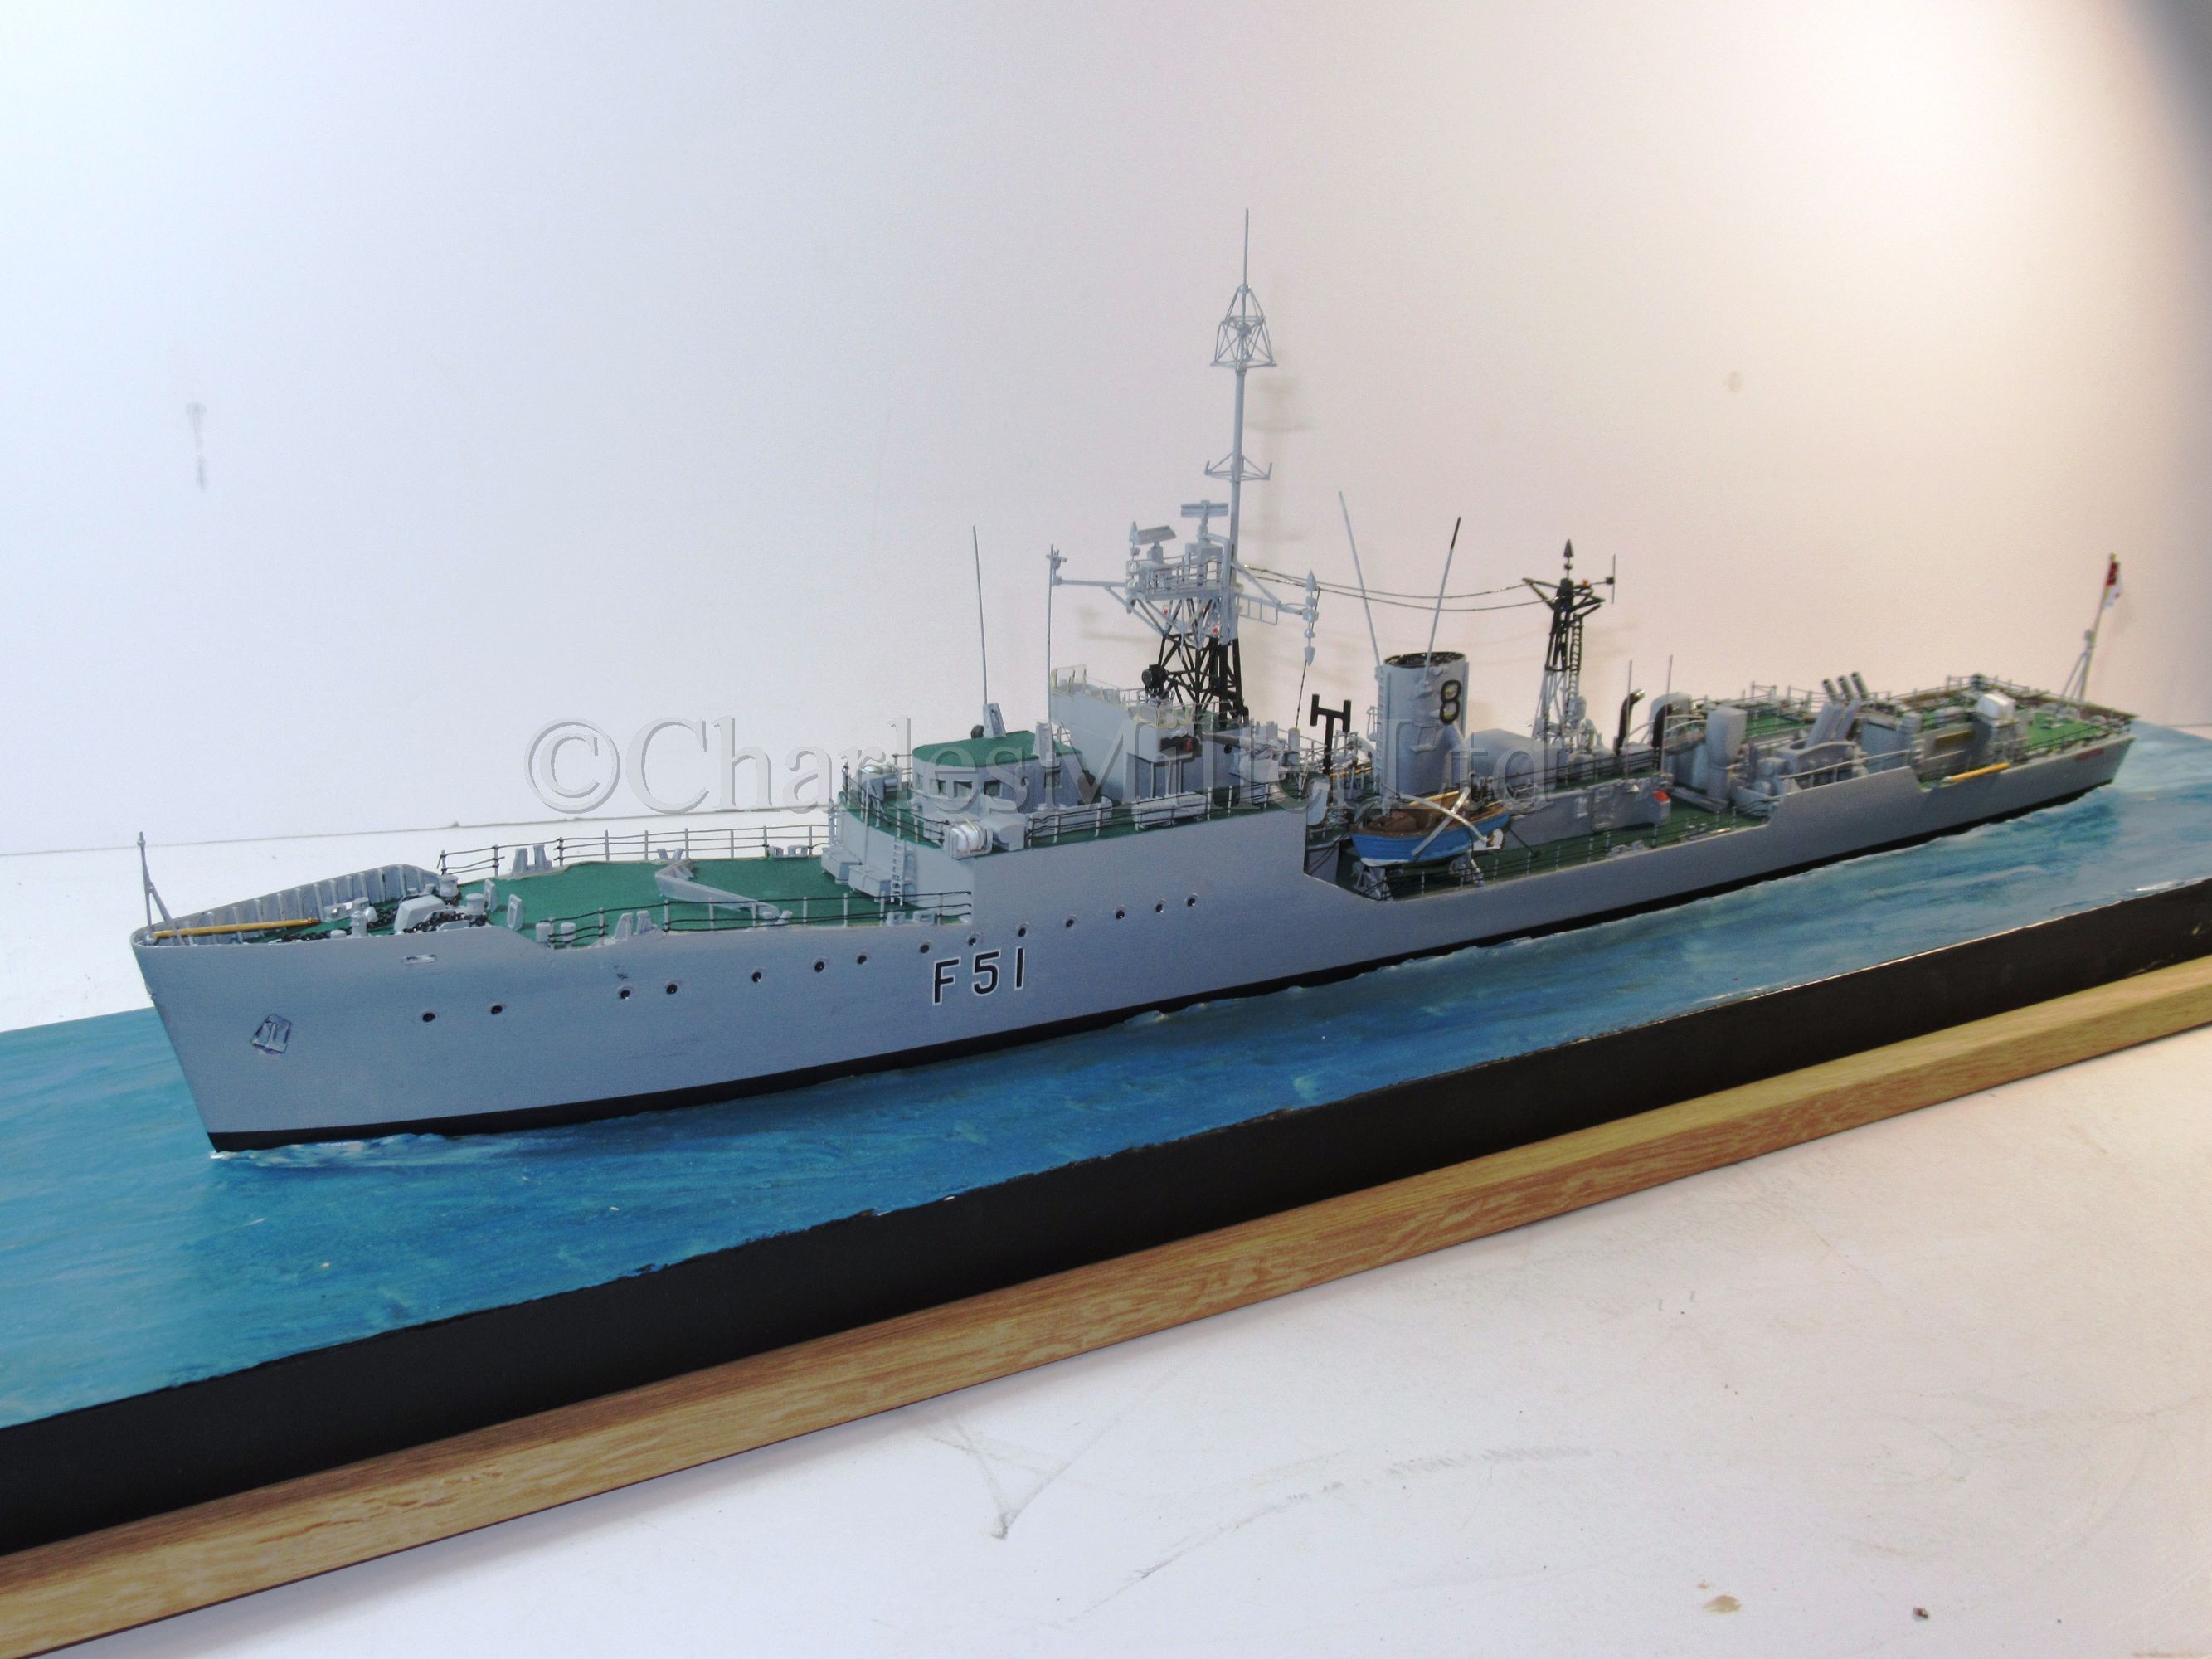 A 1:192 WATERLINE MODEL FOR THE TYPE 14 BLACKWOOD CLASS FRIGATE HMS GRAFTON (F51), AS FITTED IN - Image 8 of 14